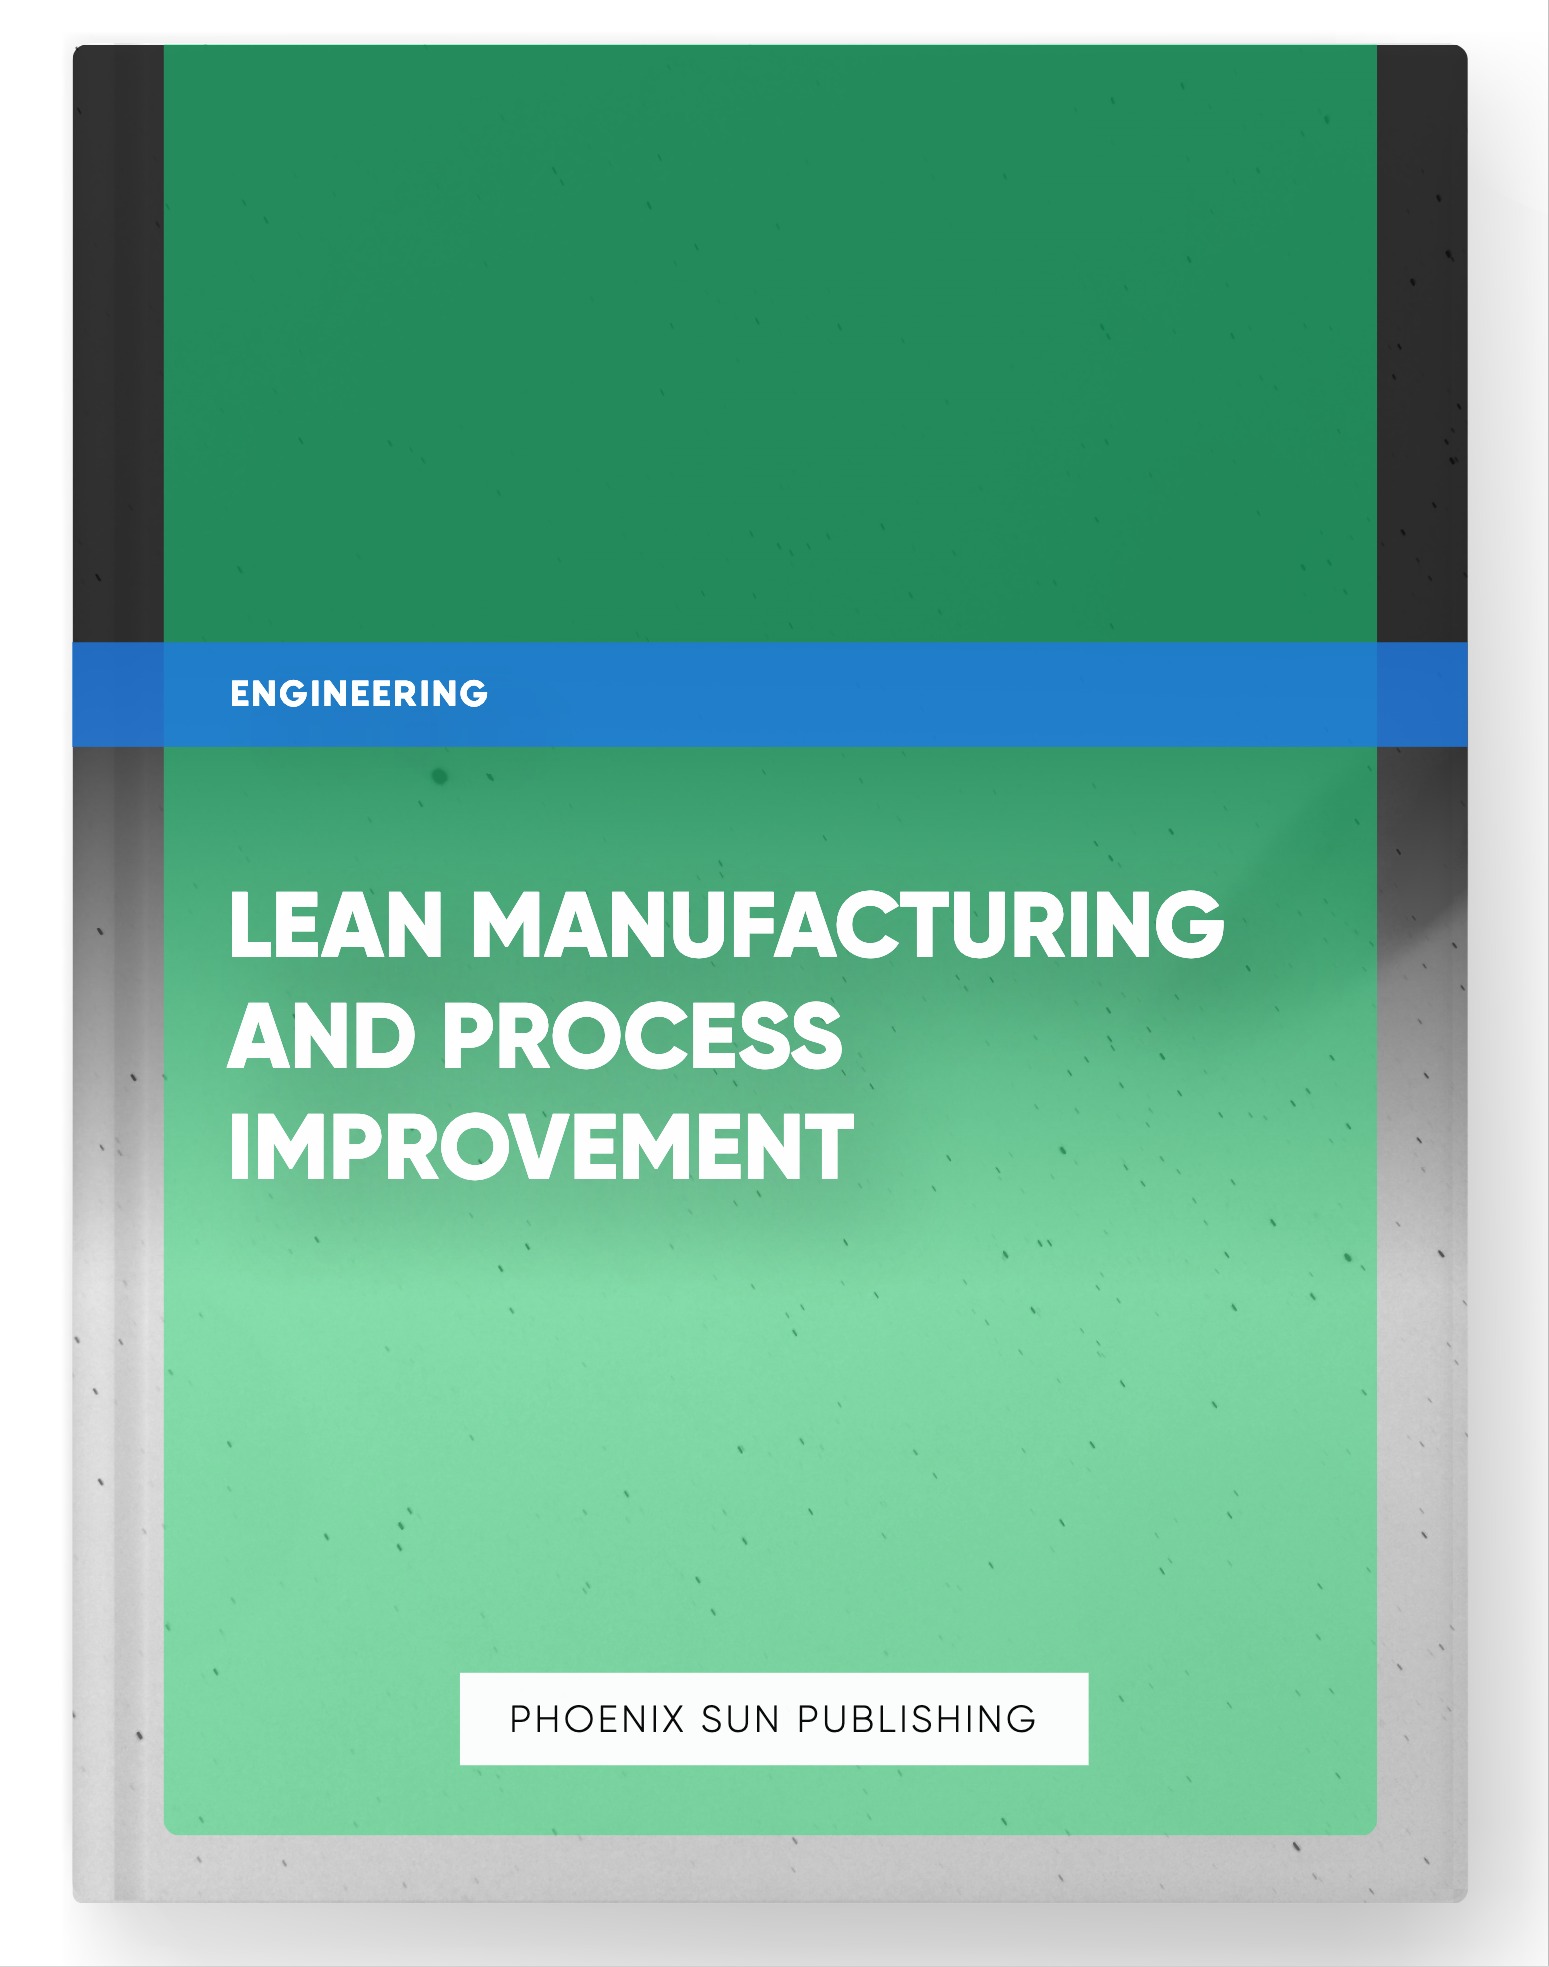 Lean Manufacturing and Process Improvement